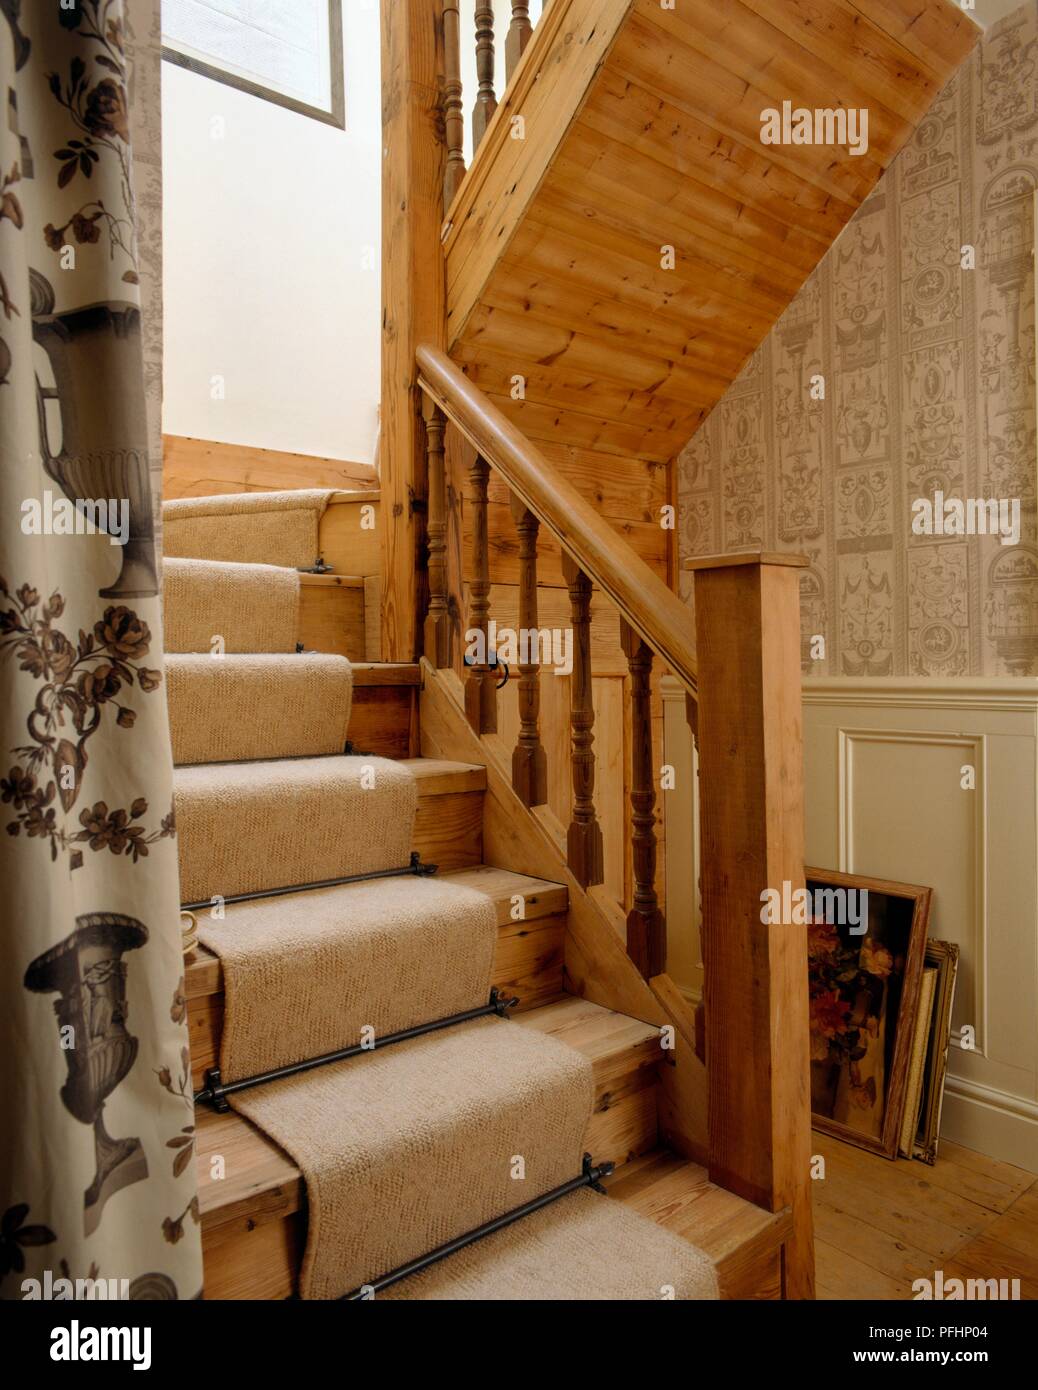 Wooden staircase with cream carpet and cream wallpaper in the hallway Stock Photo